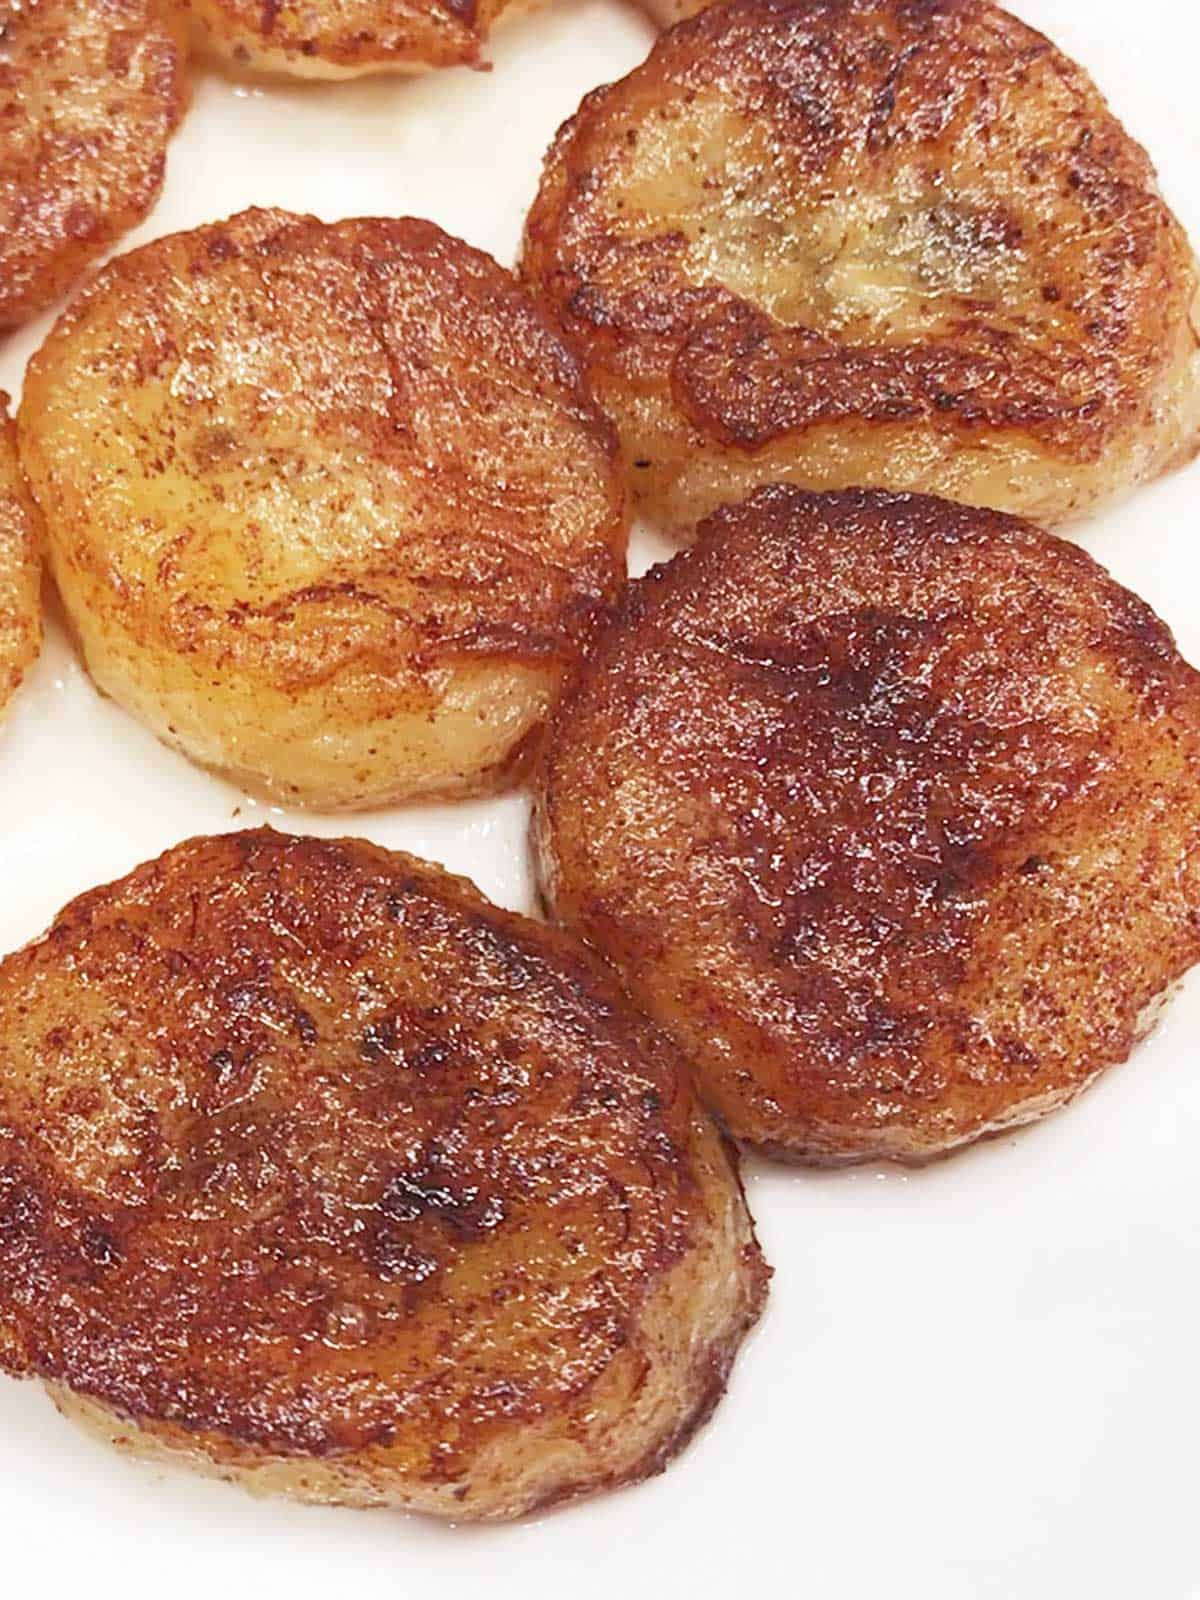 Fried bananas are served on a white plate. 